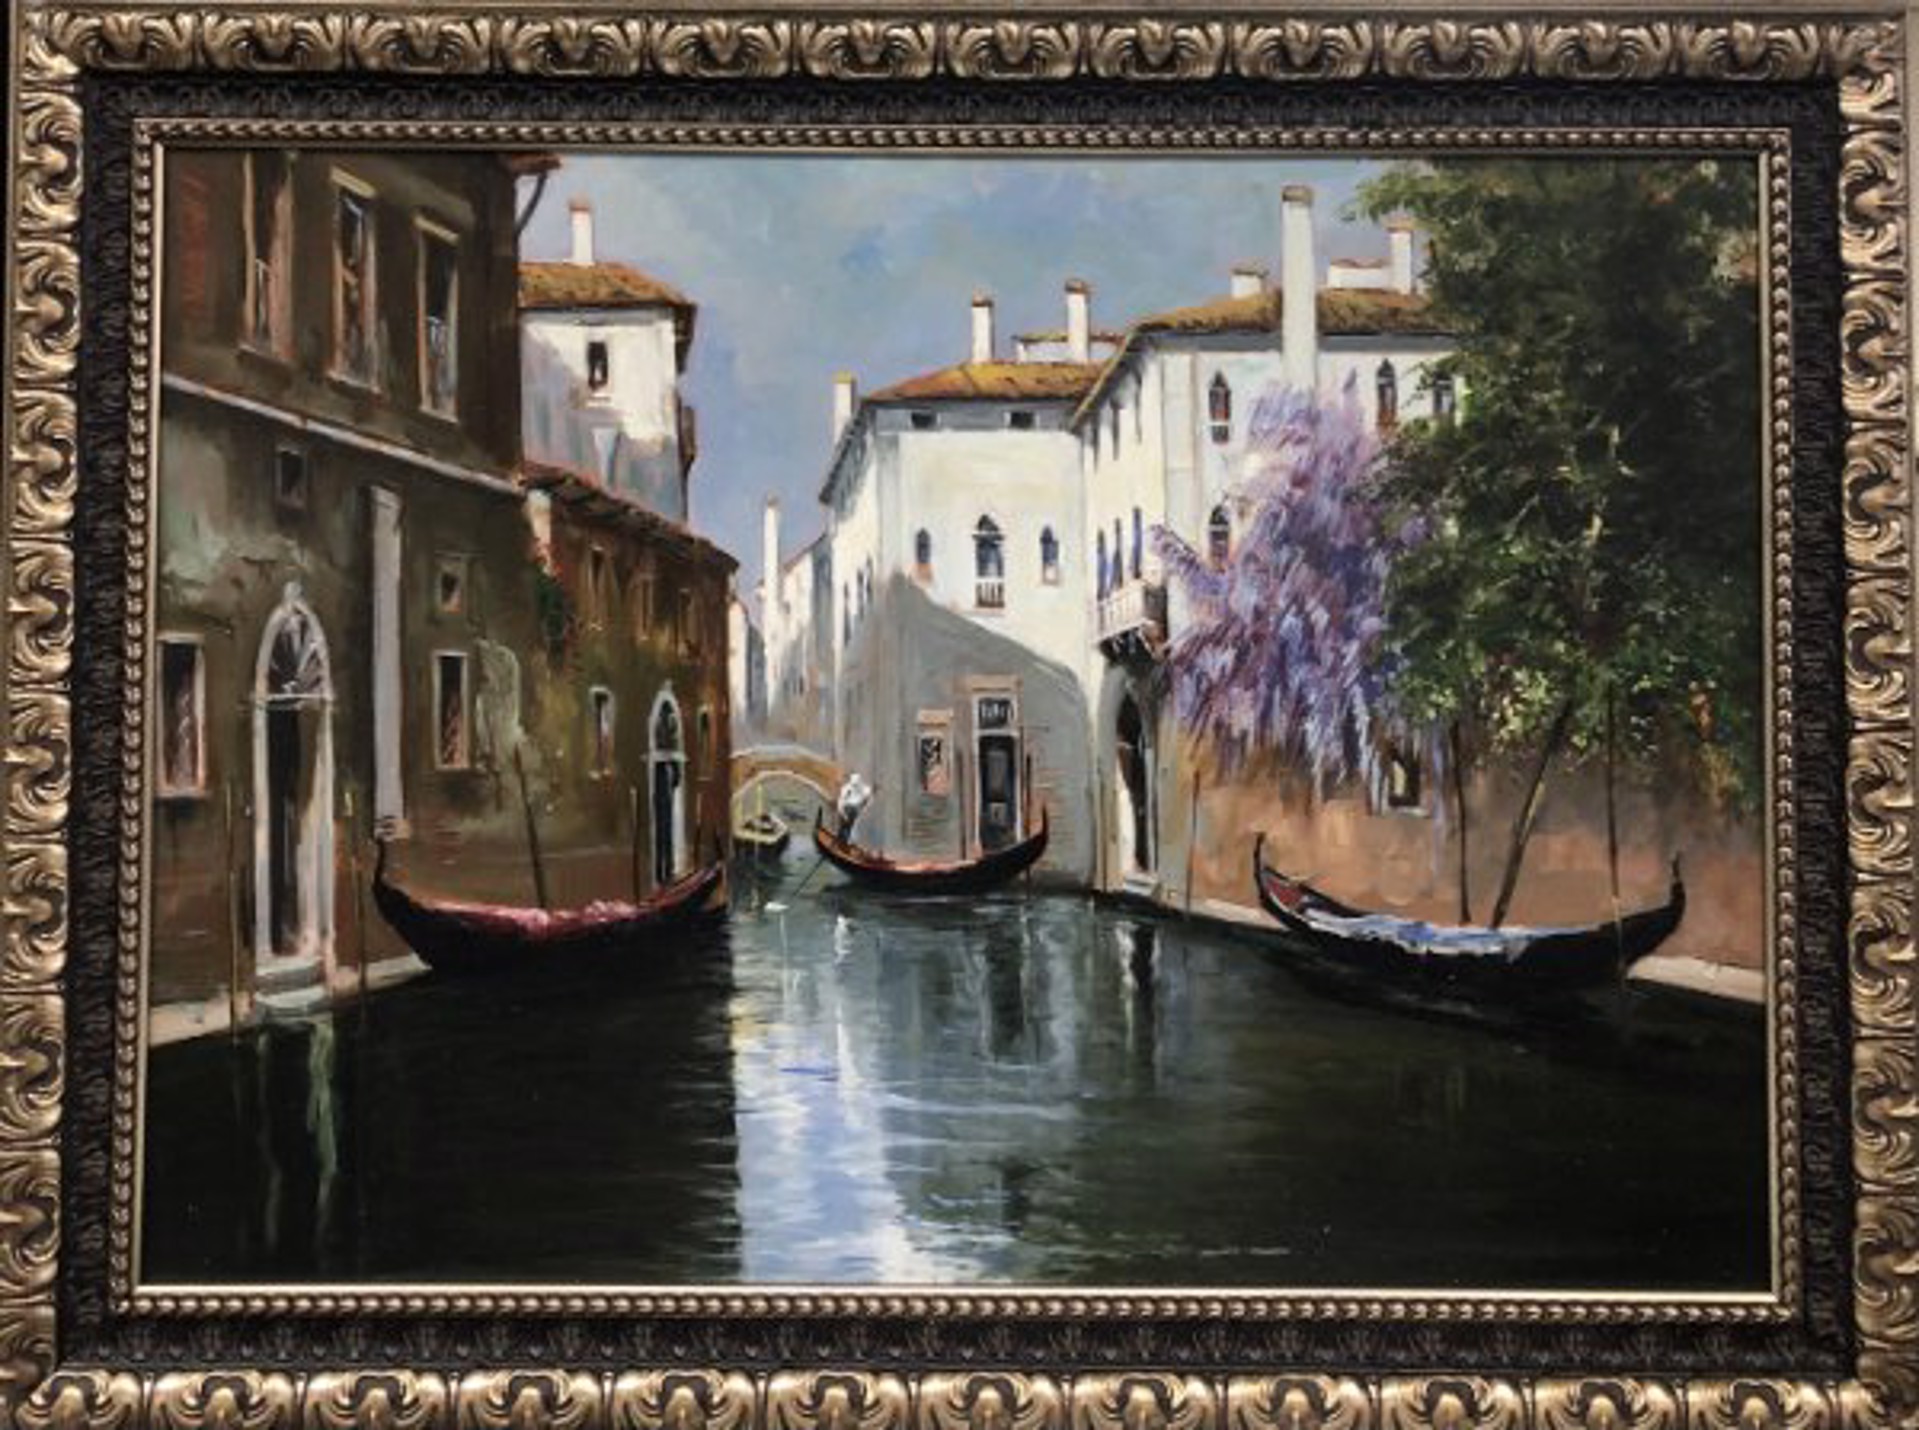 Reflections of Venice Canal by Stan Pitri